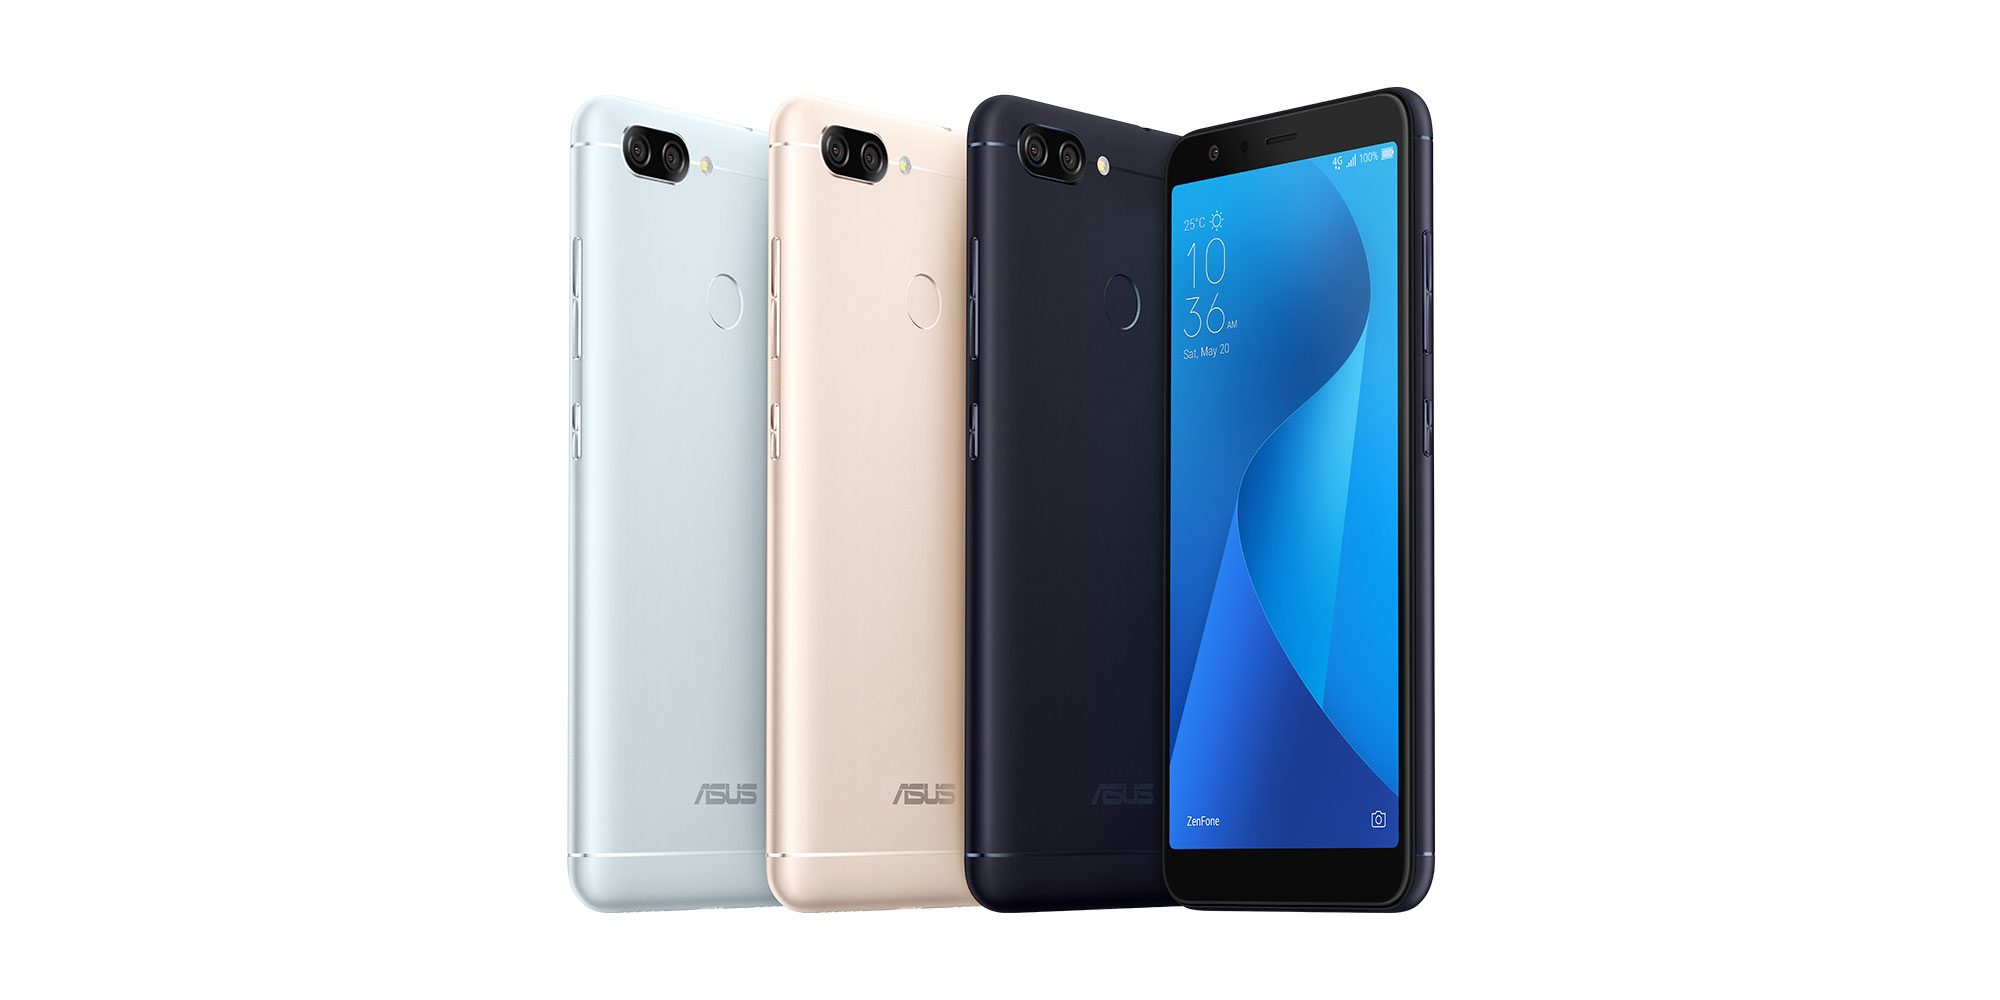 Uninstall Magisk and Unroot your Asus Zenfone Max Plus